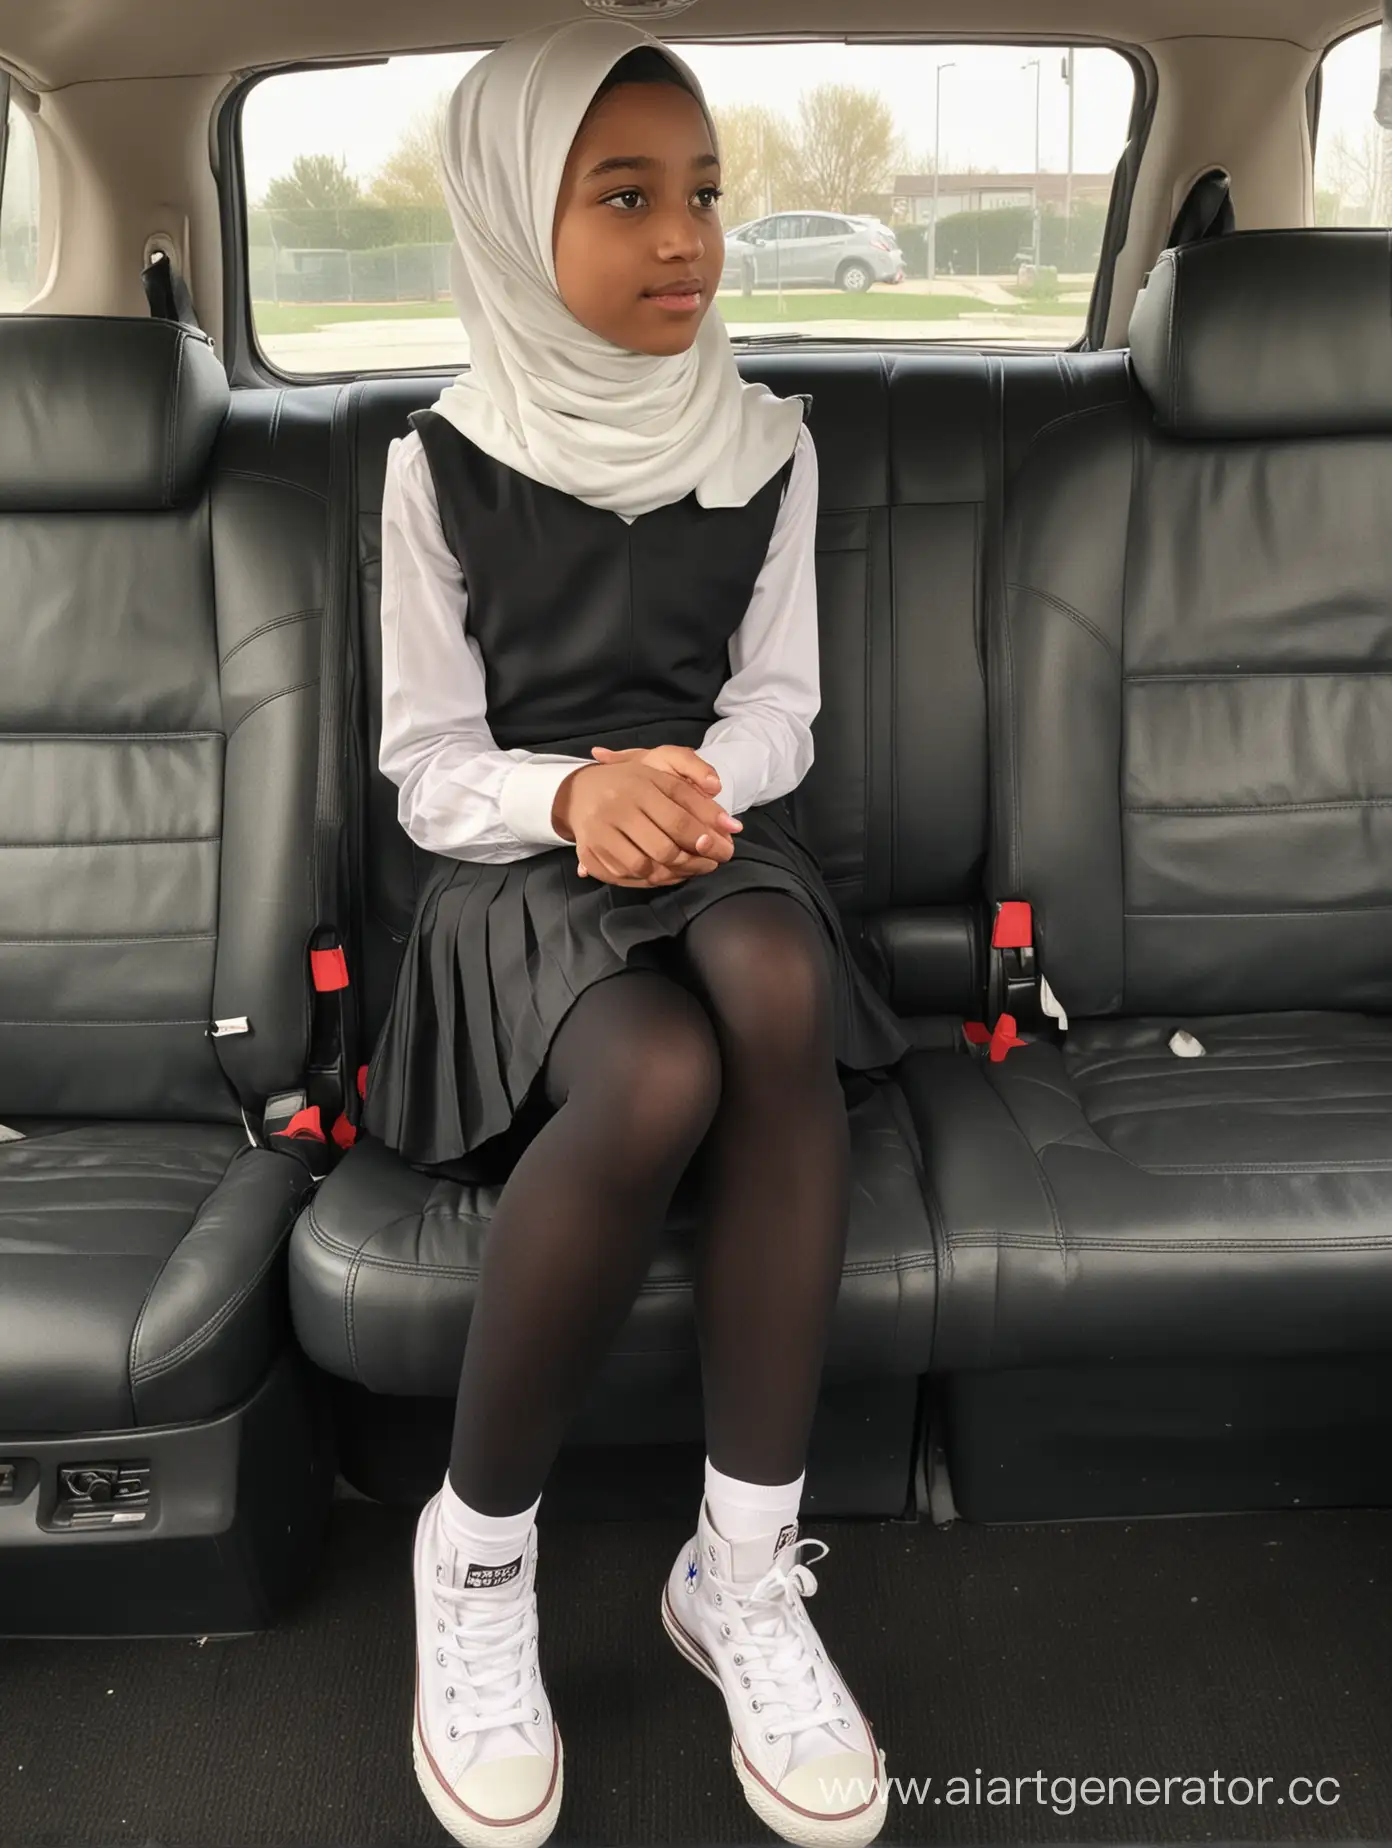 Schoolgirl-in-Hijab-Sitting-in-Car-Seat-12YearOld-Student-Wearing-Uniform-and-Converse-Shoes